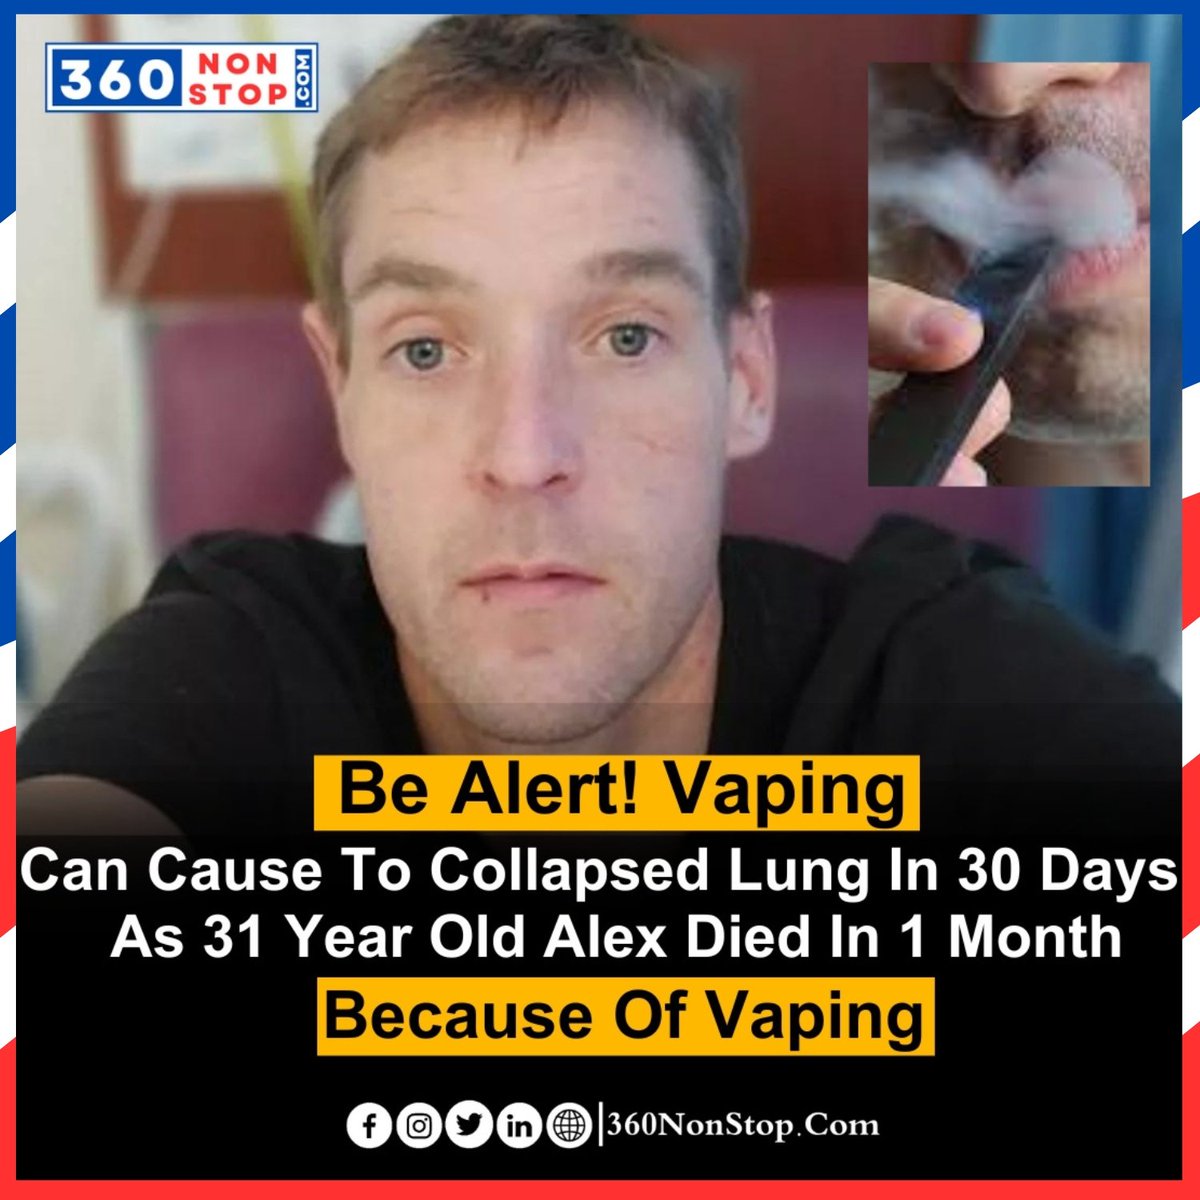 Be Alert! Vaping Can Cause To Collapsed Lungs In 30 Days As 31 Year Old Alex Died In 1 Month Because Of Vaping.
#VapingHazards #VapingDangers #VapeRelatedDeaths #VapeHealthRisks #VapingAlert #VapingHealth #E-cigaretteDangers #VapeSafety #VapingCautions #VapingHarms  #360Nonstop